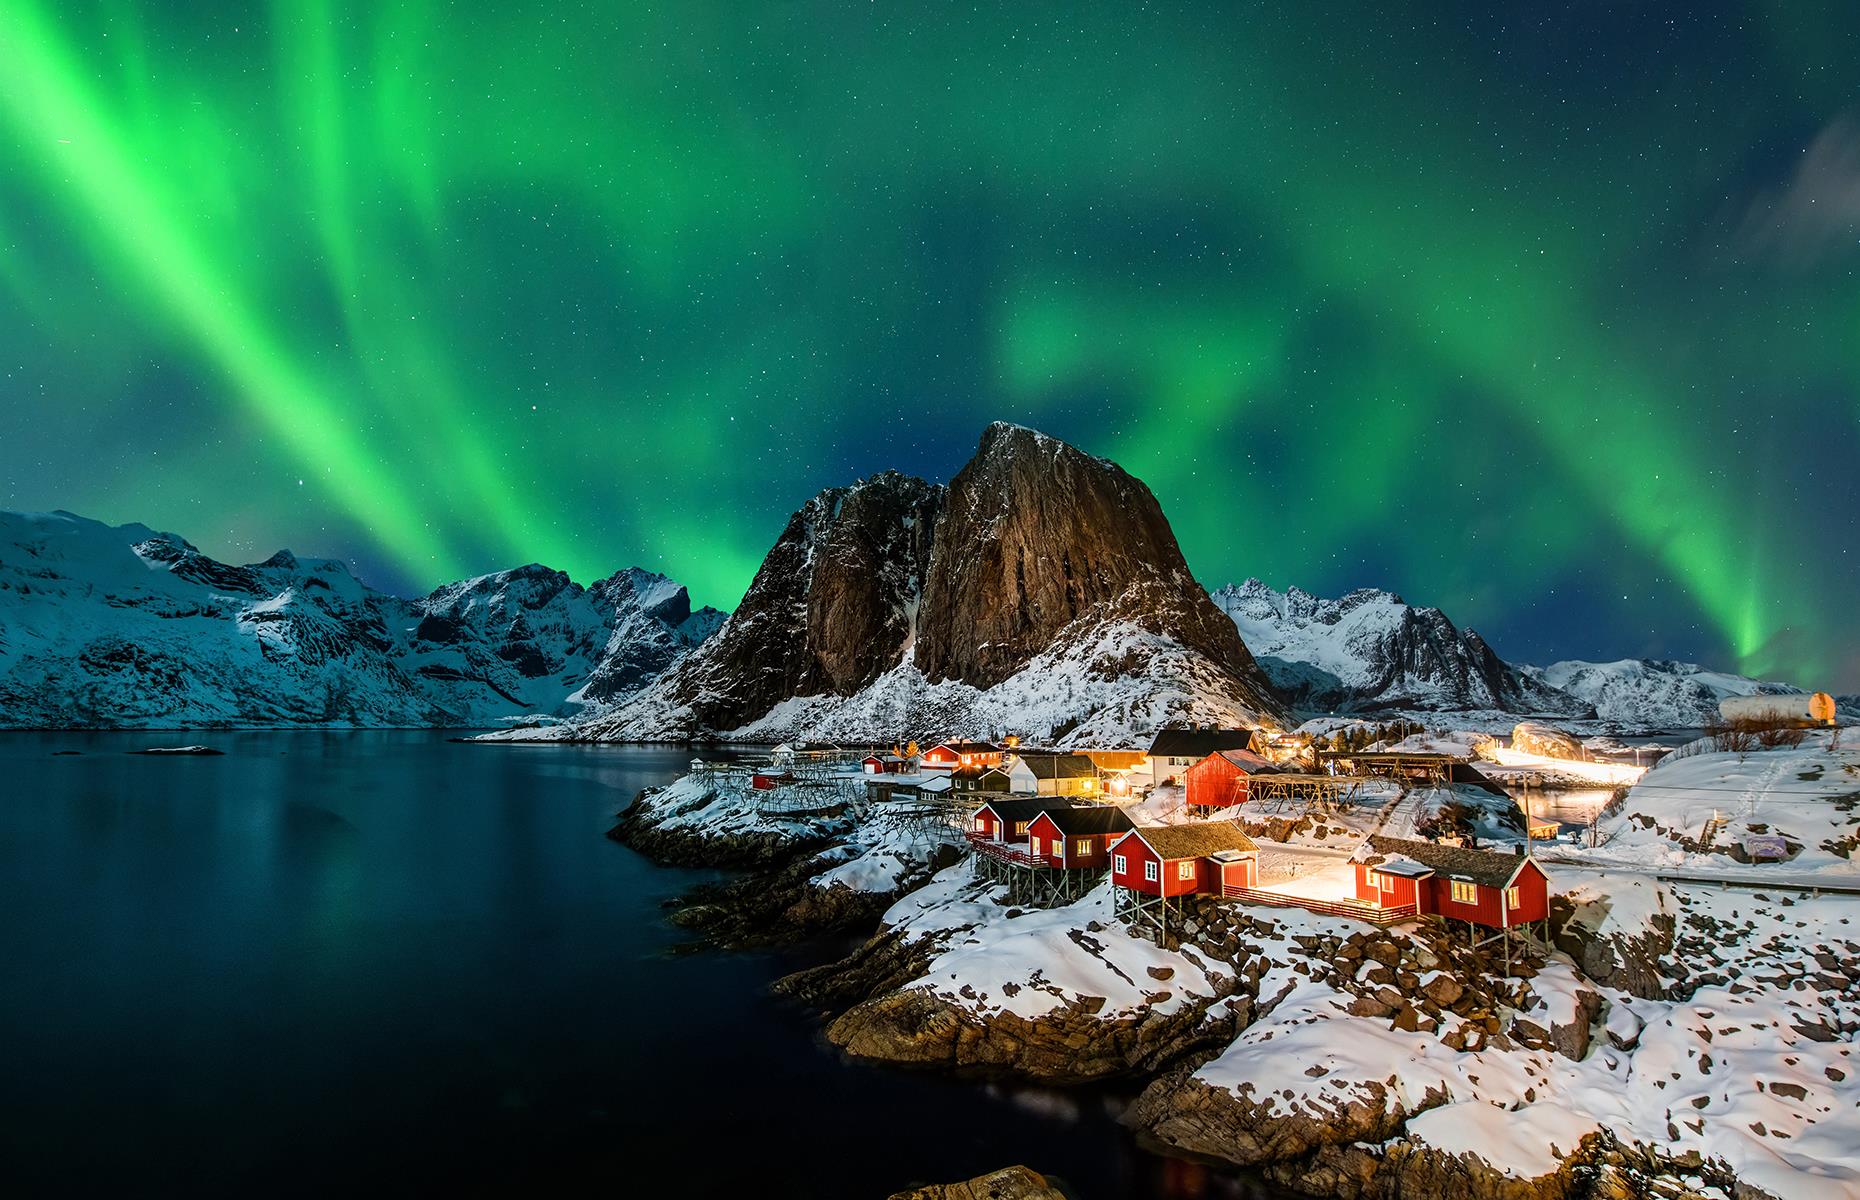 <p>Iceland, Canada and Alaska are all among the best places for spotting the colorful shimmering of the aurora borealis, however, Norway's Lofoten Archipelago just might be the most beautiful. Characterized by dramatic scenery, traditional fishermen's houses and short Arctic winter days, it's the perfect setting for a wilder winter adventure spotting the Northern Lights.</p>  <p><a href="https://www.loveexploring.com/galleries/89064/13-unexpected-places-where-you-can-see-the-northern-lights?page=1"><strong>See the Northern Lights at these unexpected places</strong></a></p>